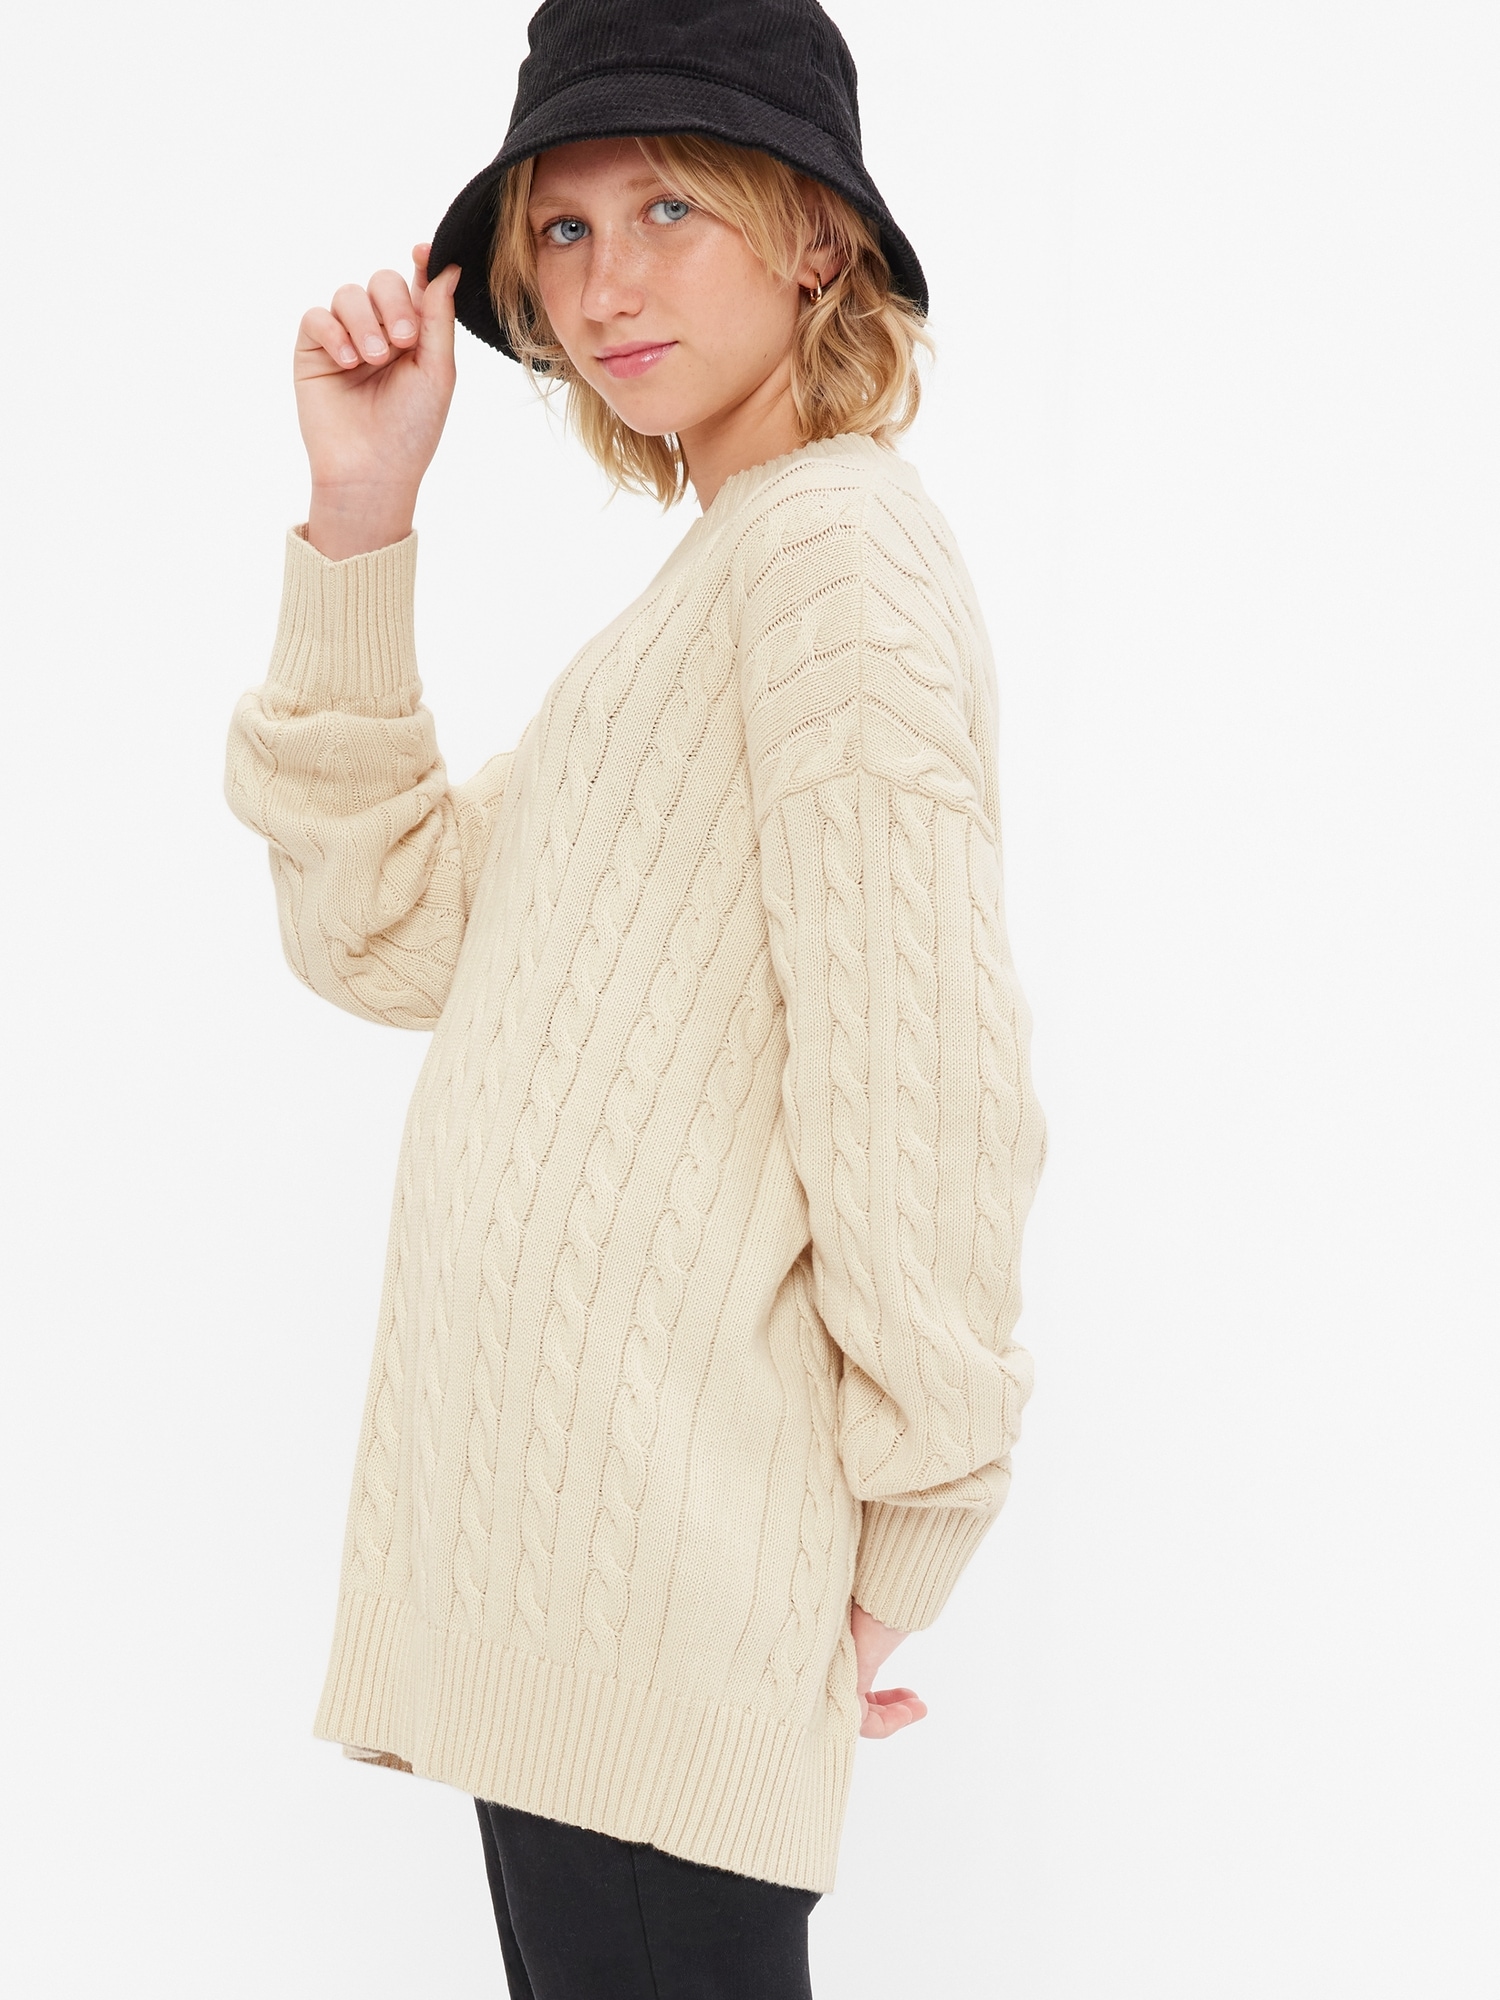 Teen 100% Organic Cotton Oversized Cable-Knit Sweater | Gap